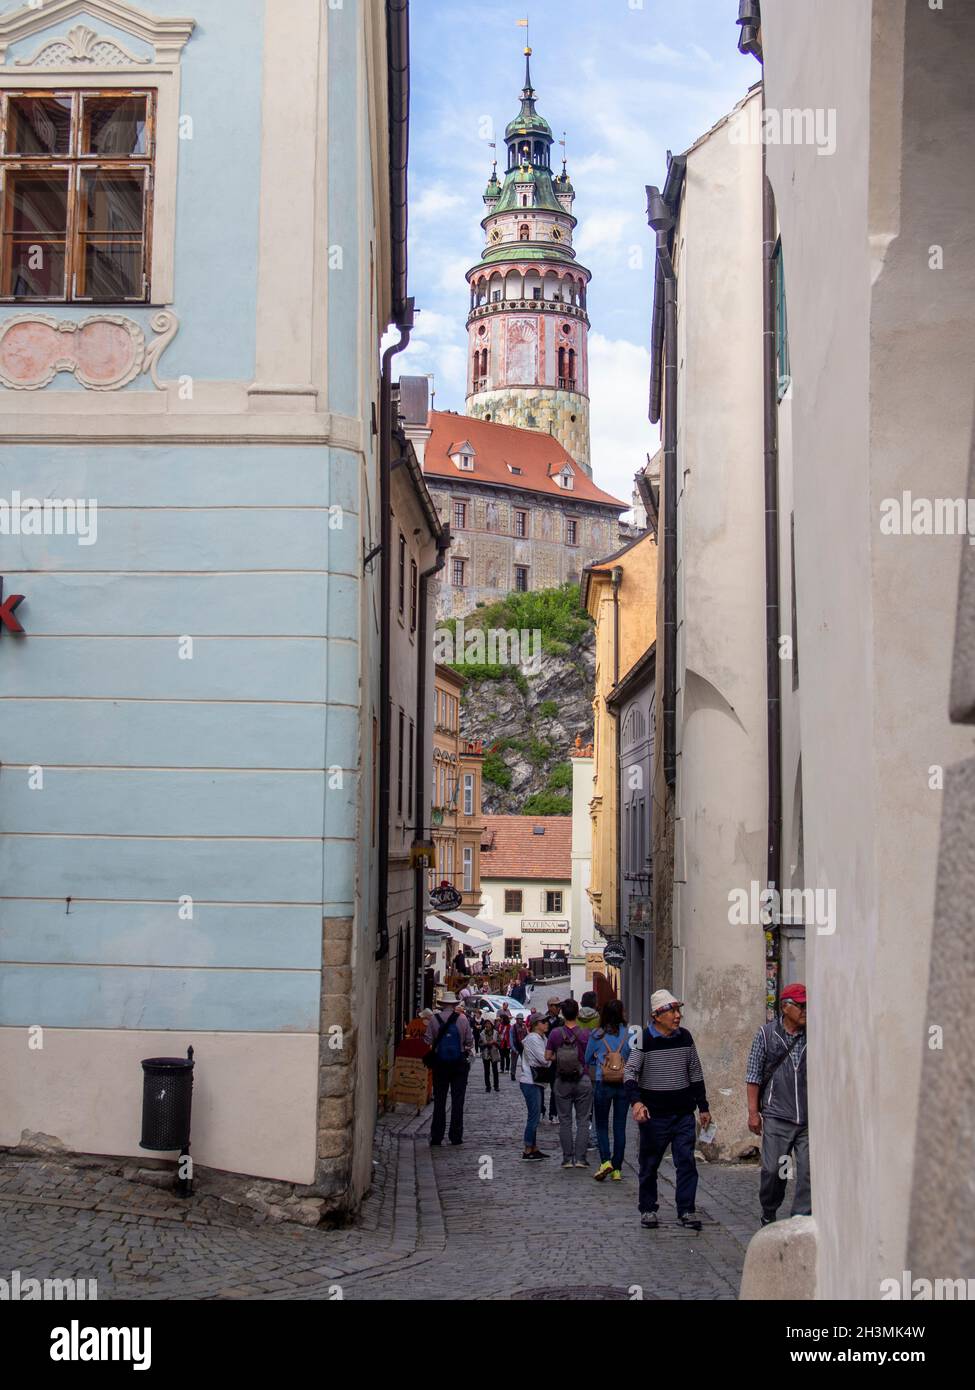 Český Krumlov Castle Tower framed by the narrow streets of the town: This high round renaissance tower dominates the skyline in the small town of Český Krumlov. Fresco paintings decorate its facade. Stock Photo